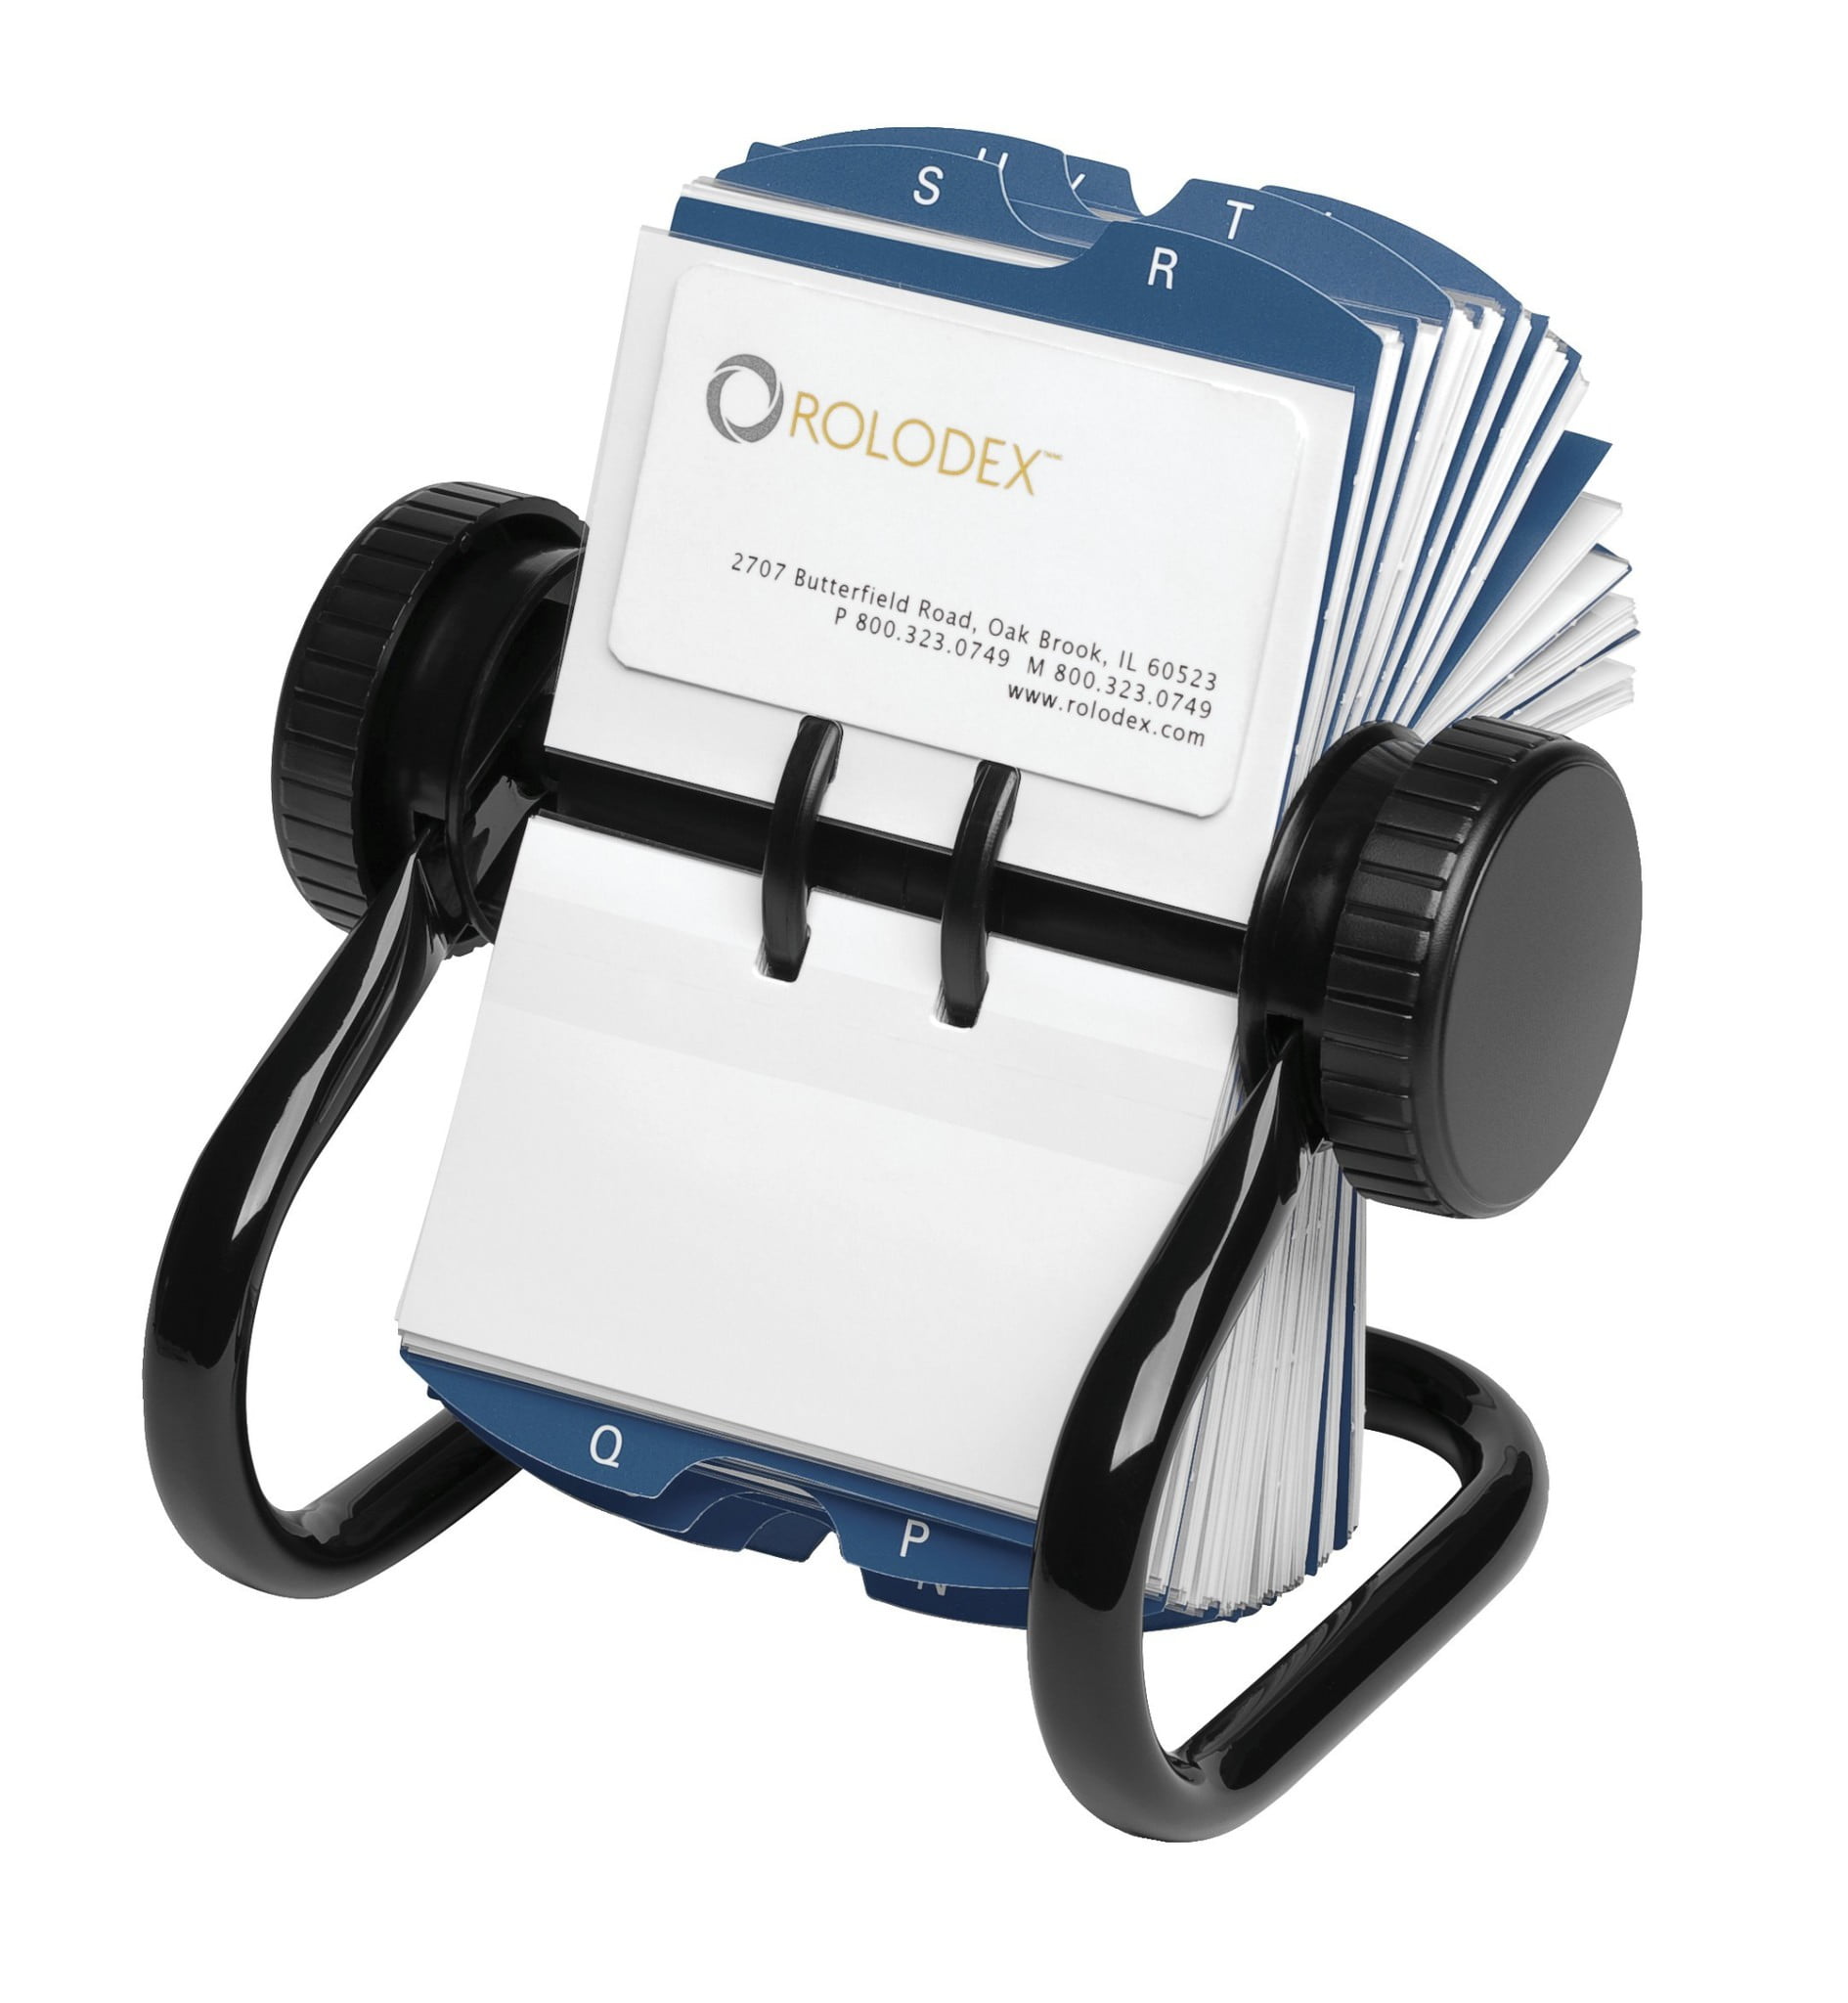 Rolodex Open Rotary Business Card File, Black